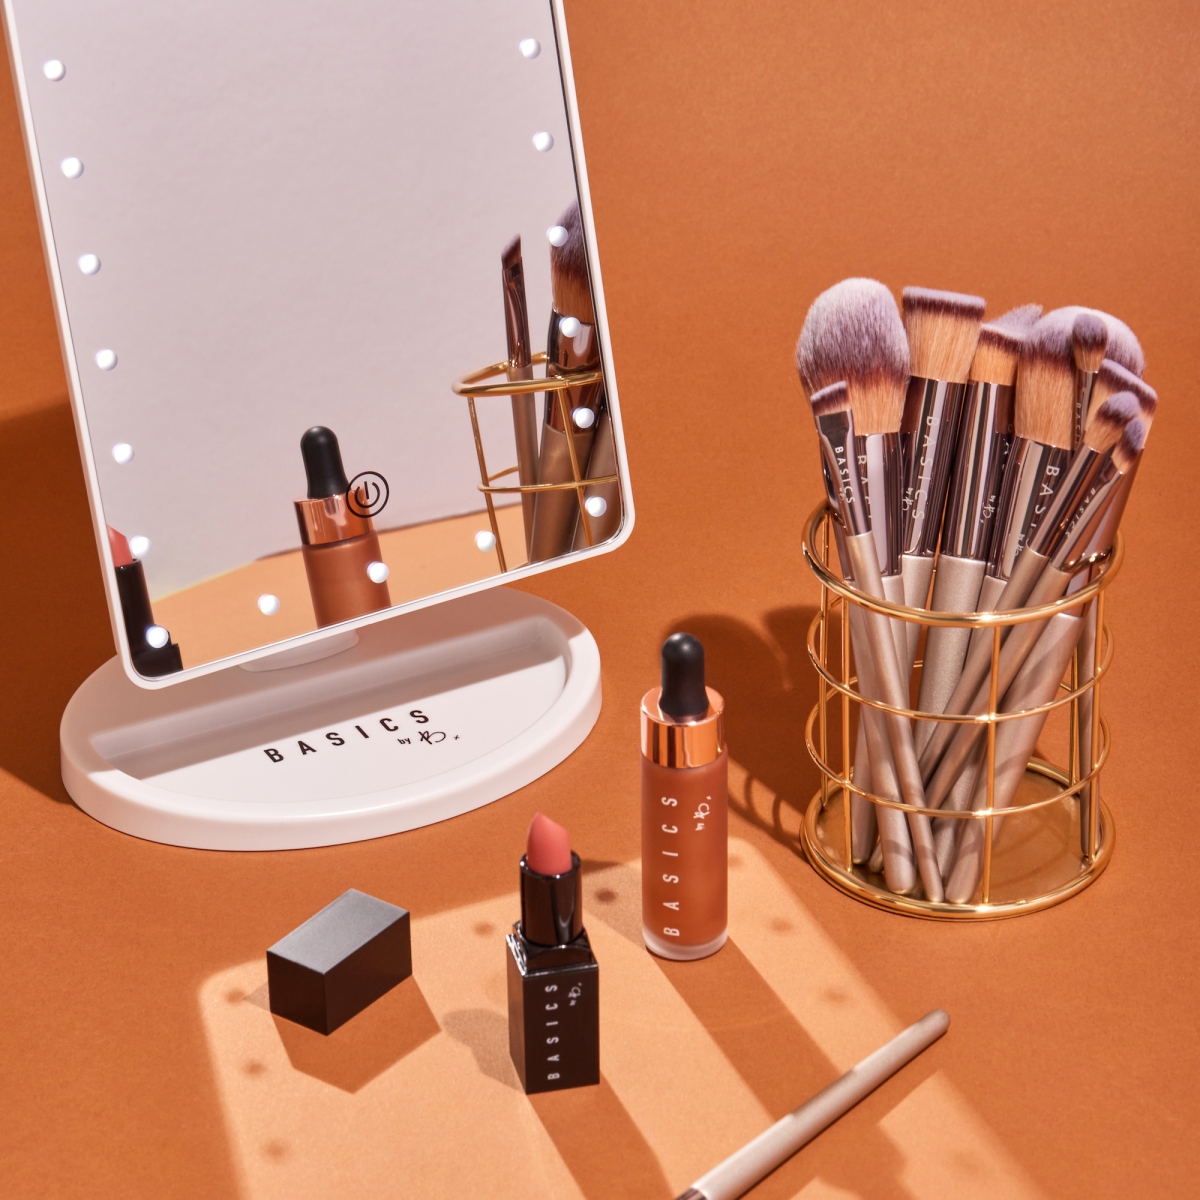 The Best Make-Up Brushes To Buy In Australia